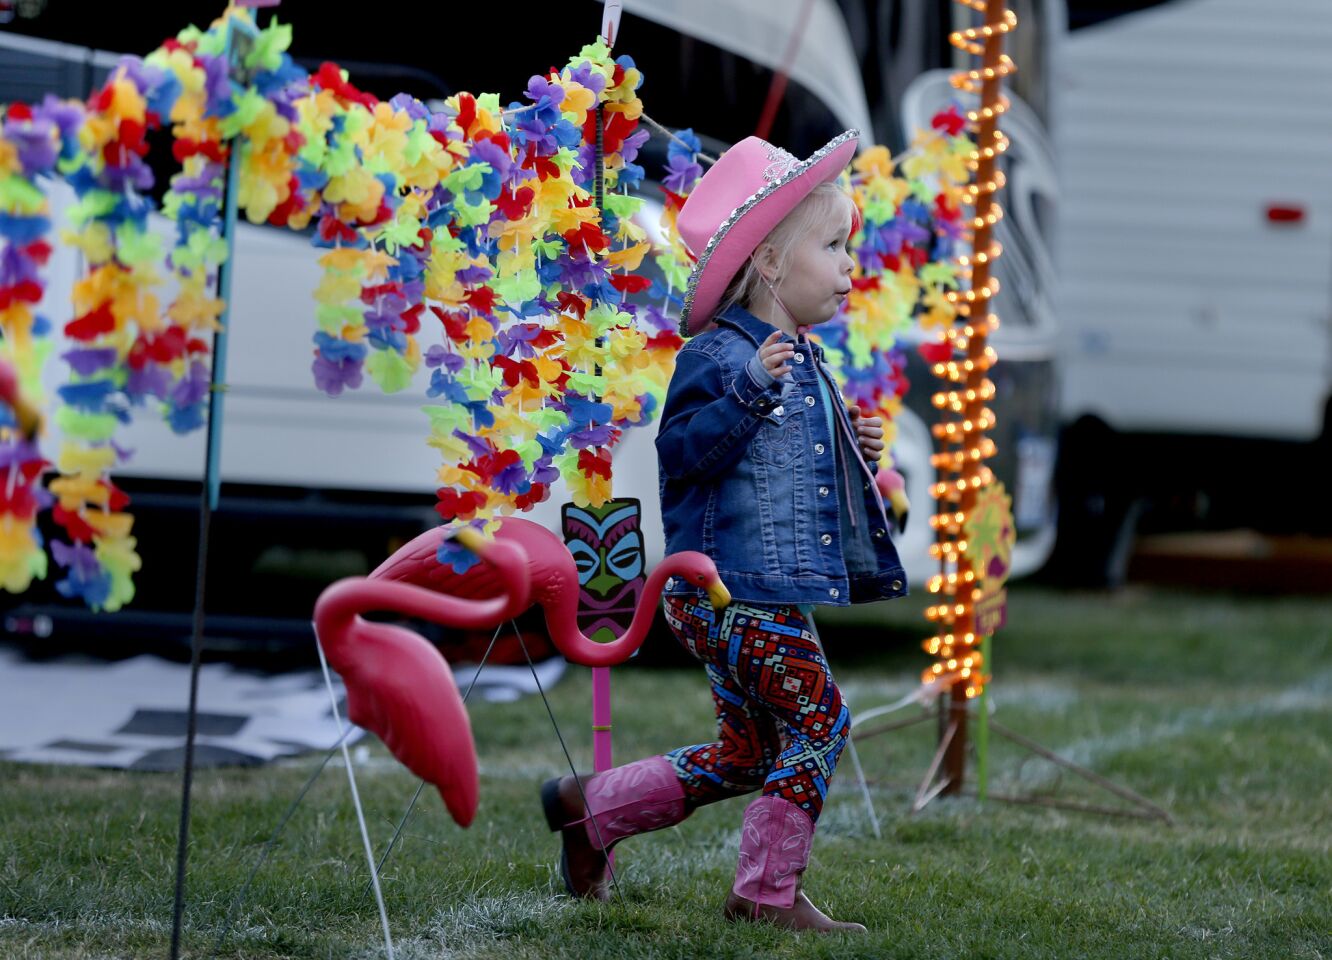 Madisyn Recupido, 4, of Beaumont, who is attending her fourth Stagecoach festival, sports pink boots and hat while checking out plastic pink flamingos in the RV Resort at the Empire Polo Club in Indio.